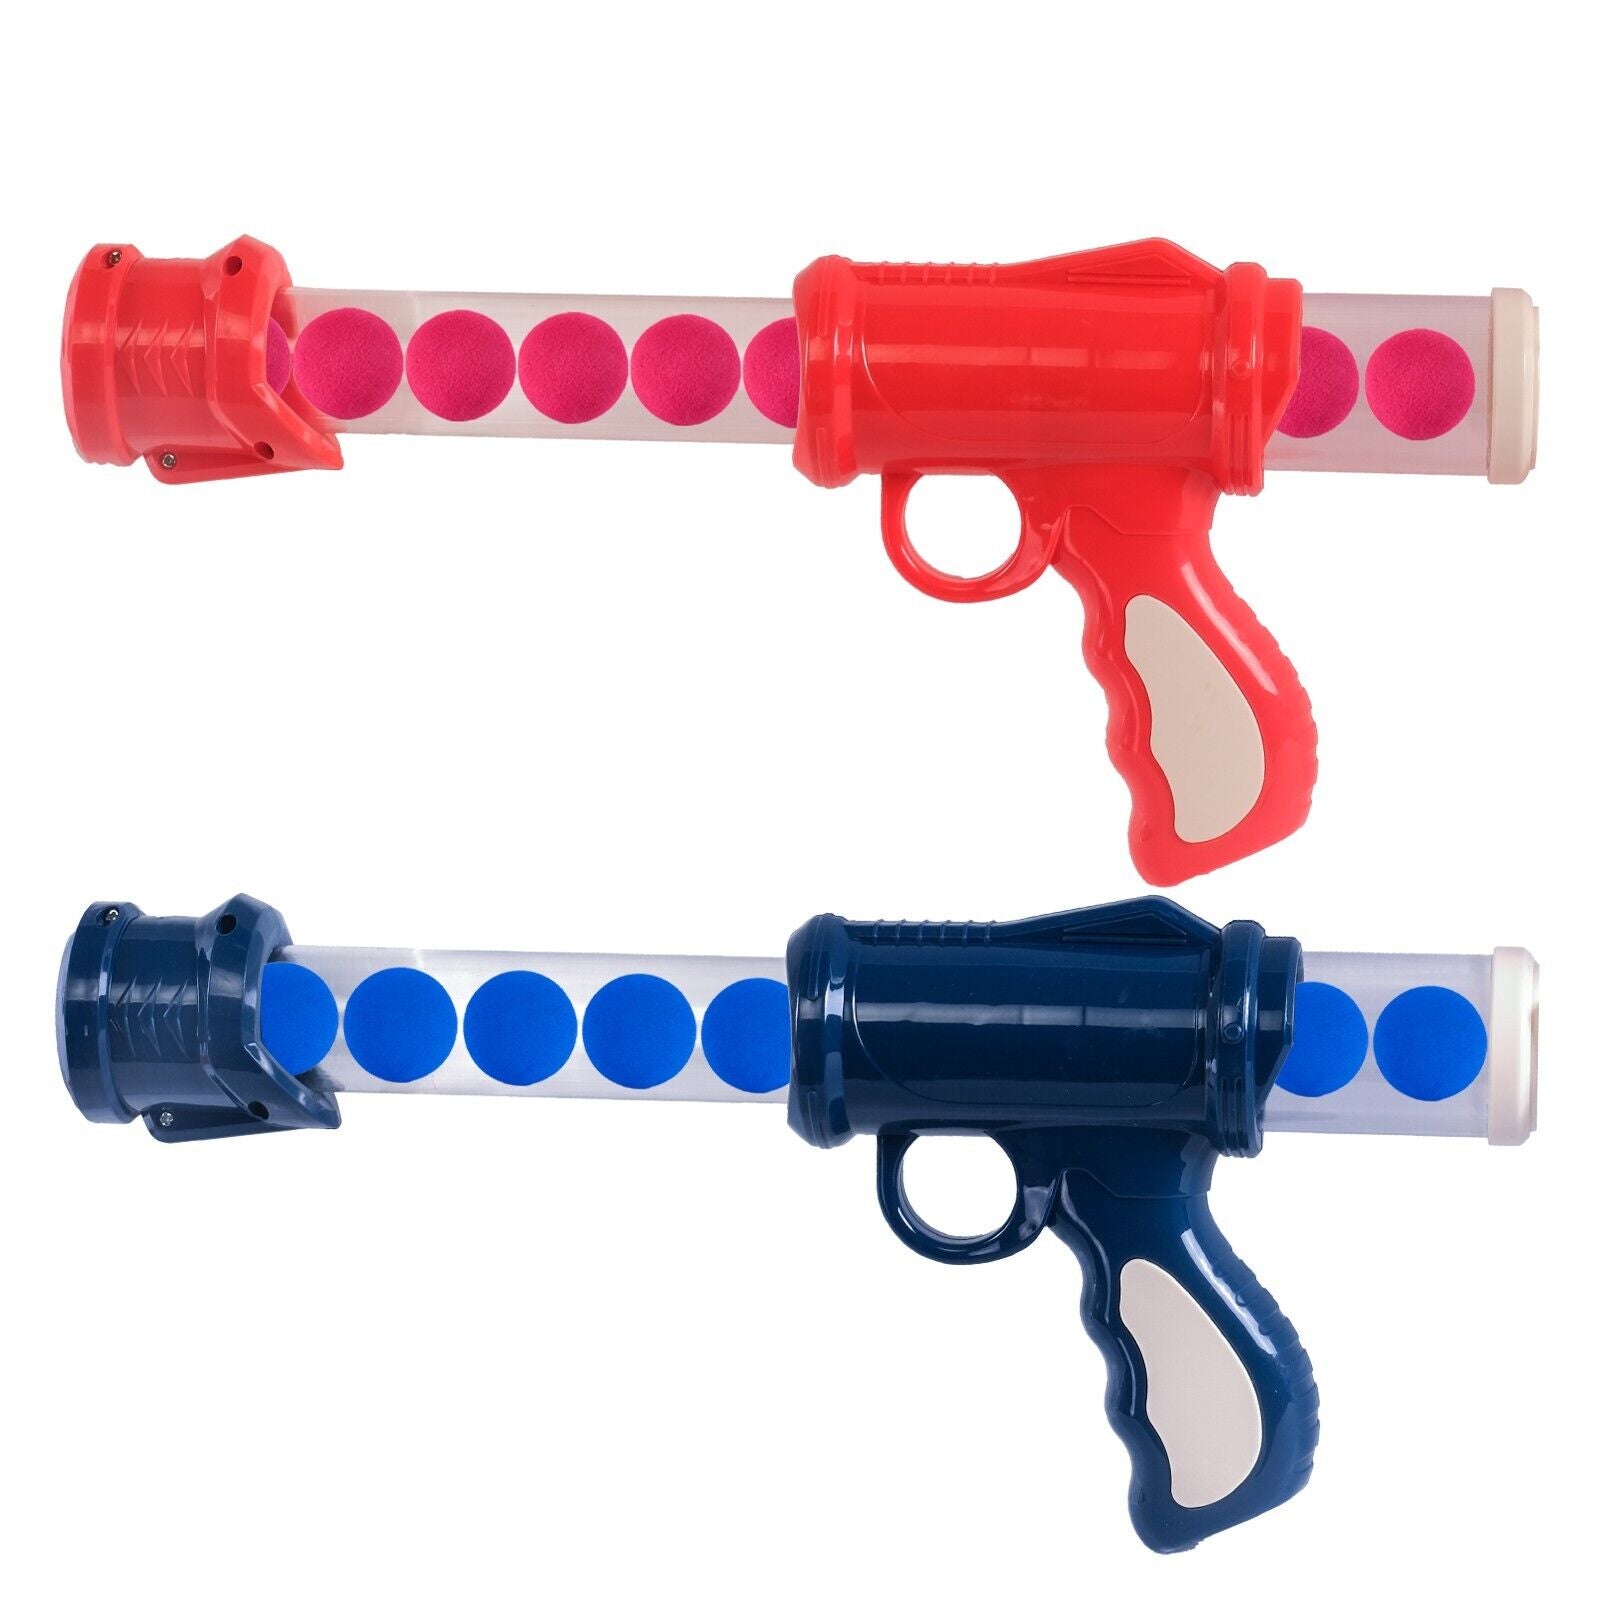 (Out of Stock) Dinosaur Toys Shooting Target Toy Gun for Kids-Air Pump Shooting Game with 20 Balls